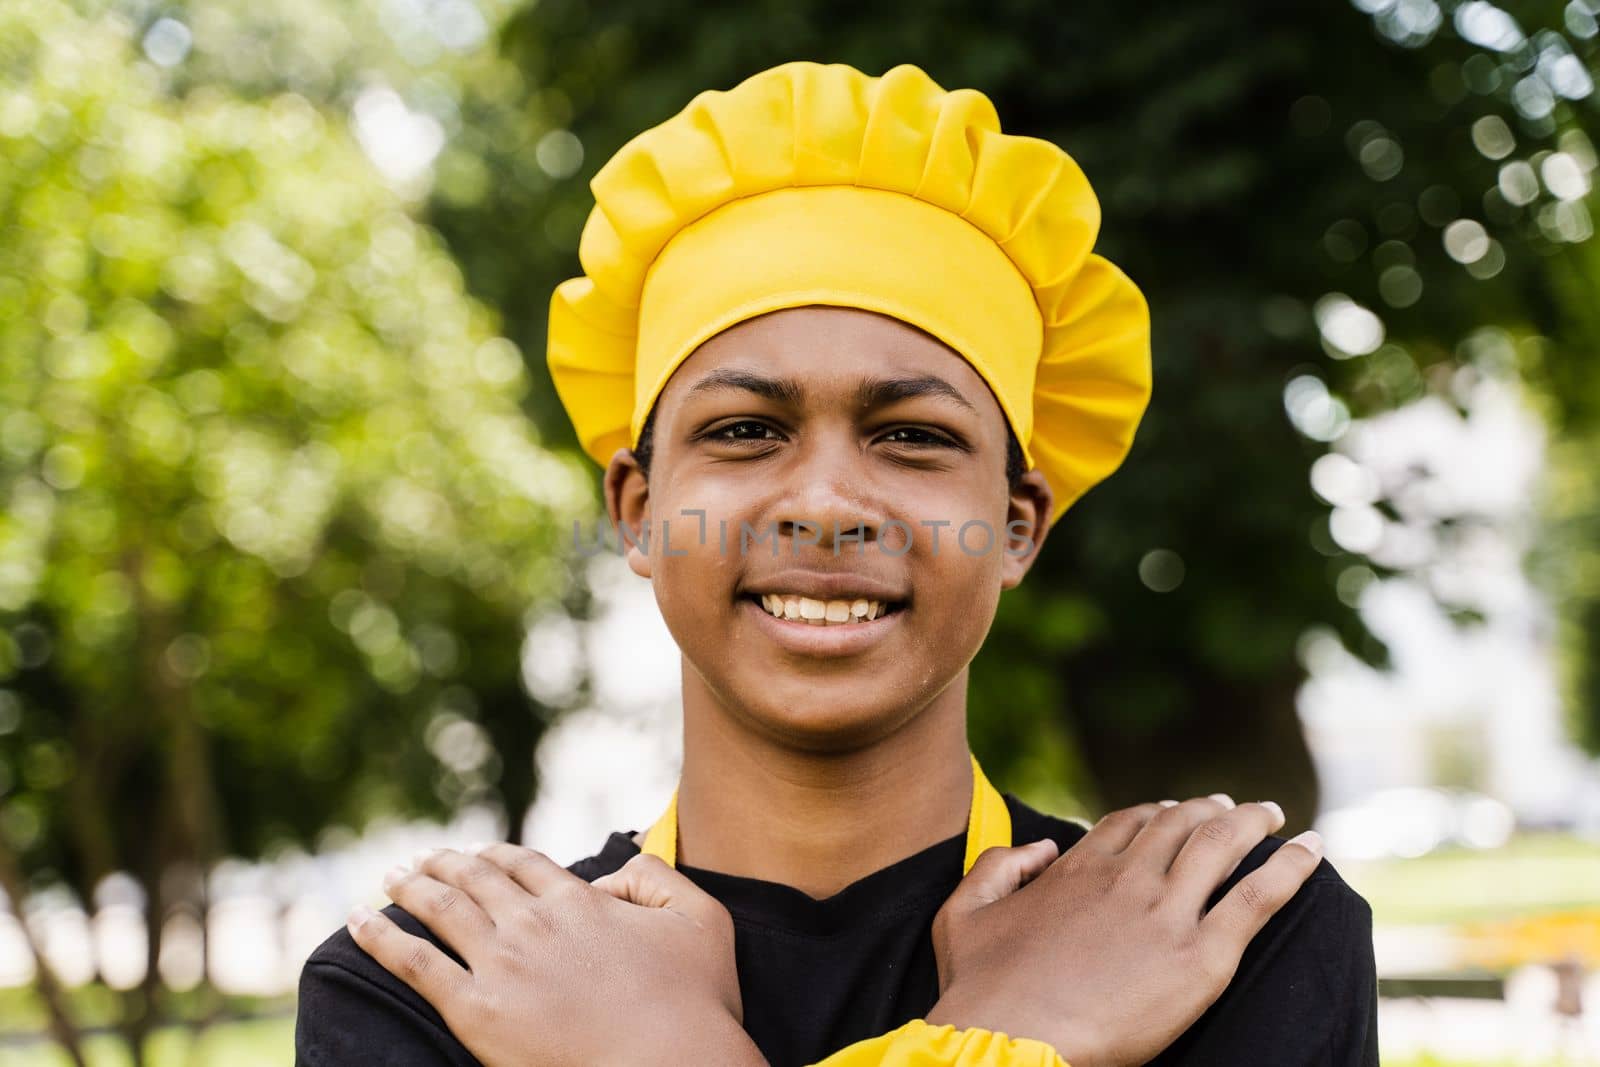 Black african teenager cook in chefs hat and yellow apron uniform smiling outdoor. Creative advertising for cafe or restaurant